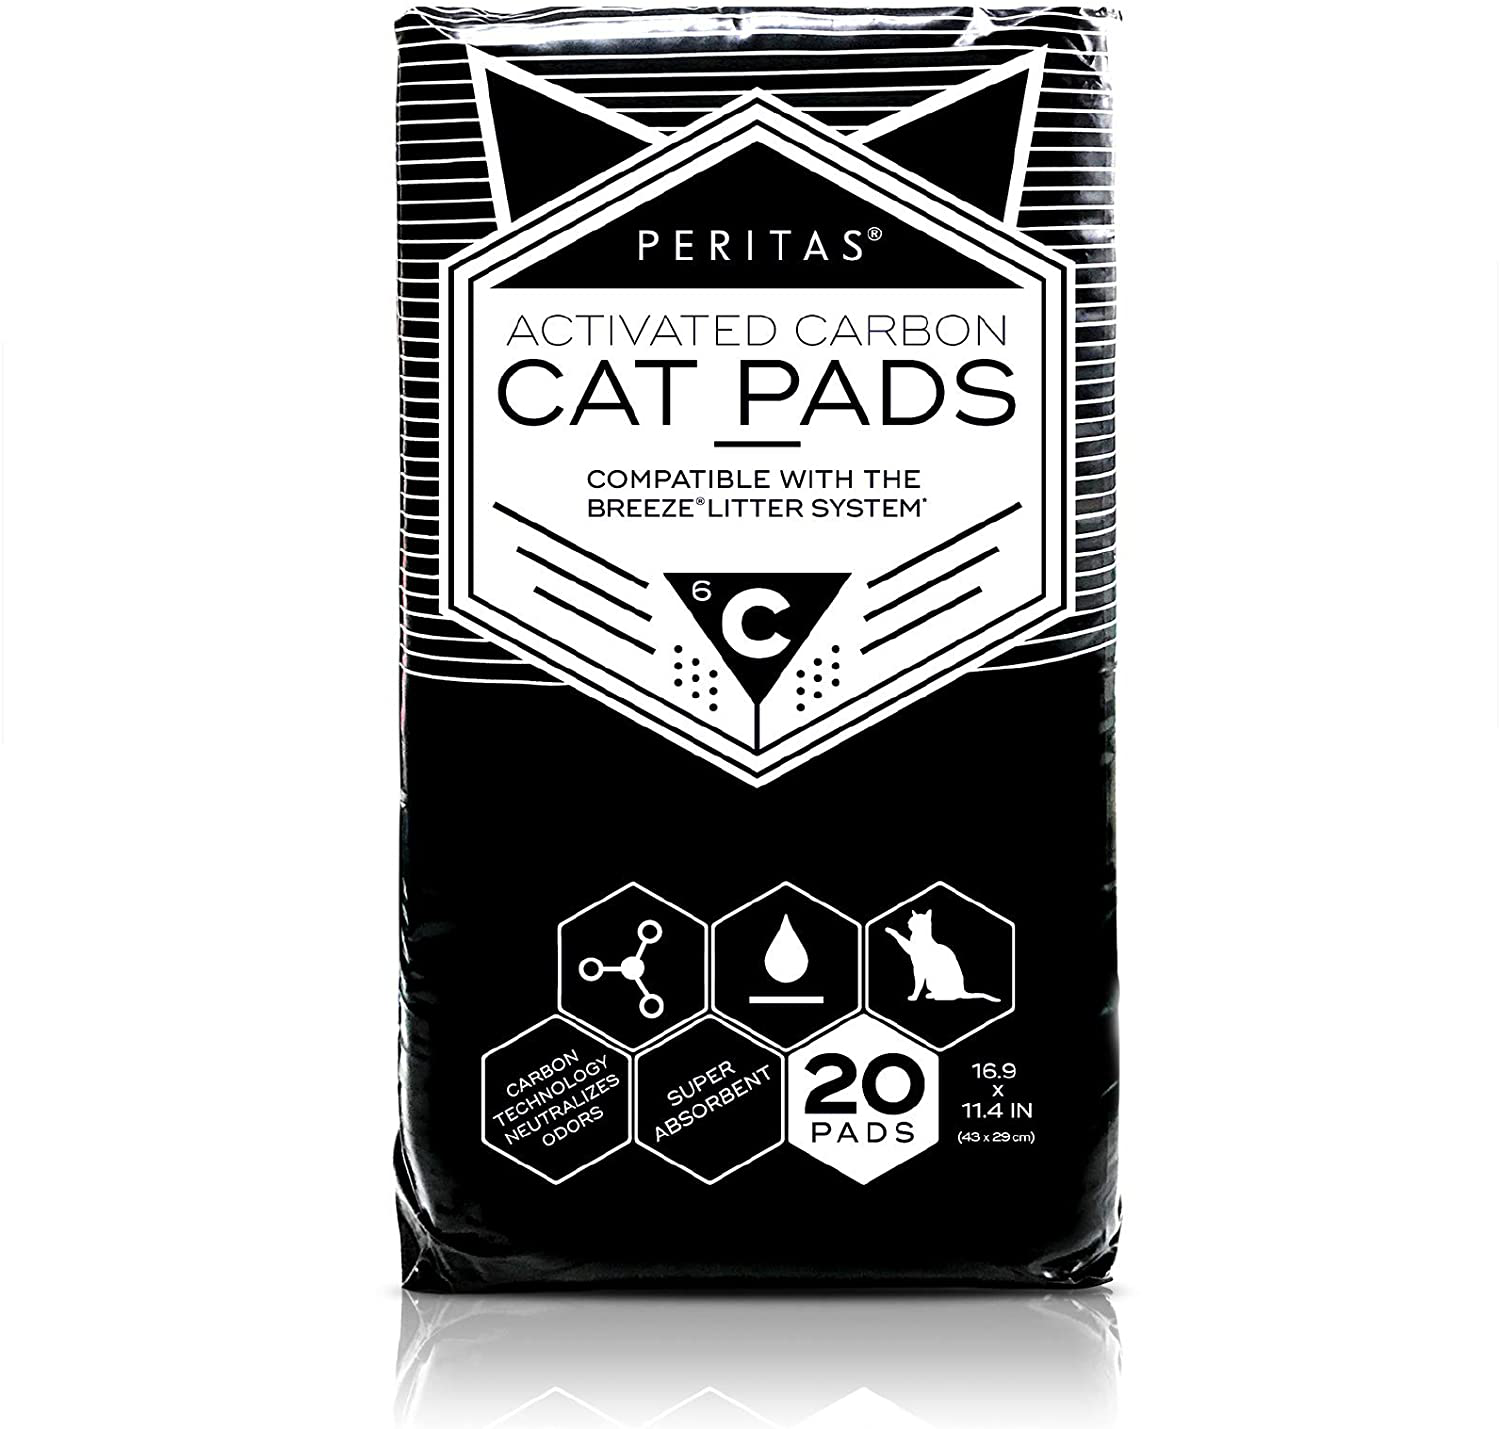 Peritas Cat Pads | Generic Refill for Breeze Tidy Cat Litter System | Cat Liner Pads for Litter Box | Quick-Dry, Super Absorbent, Leak Proof | 16.9"X11.4" (20 Count)